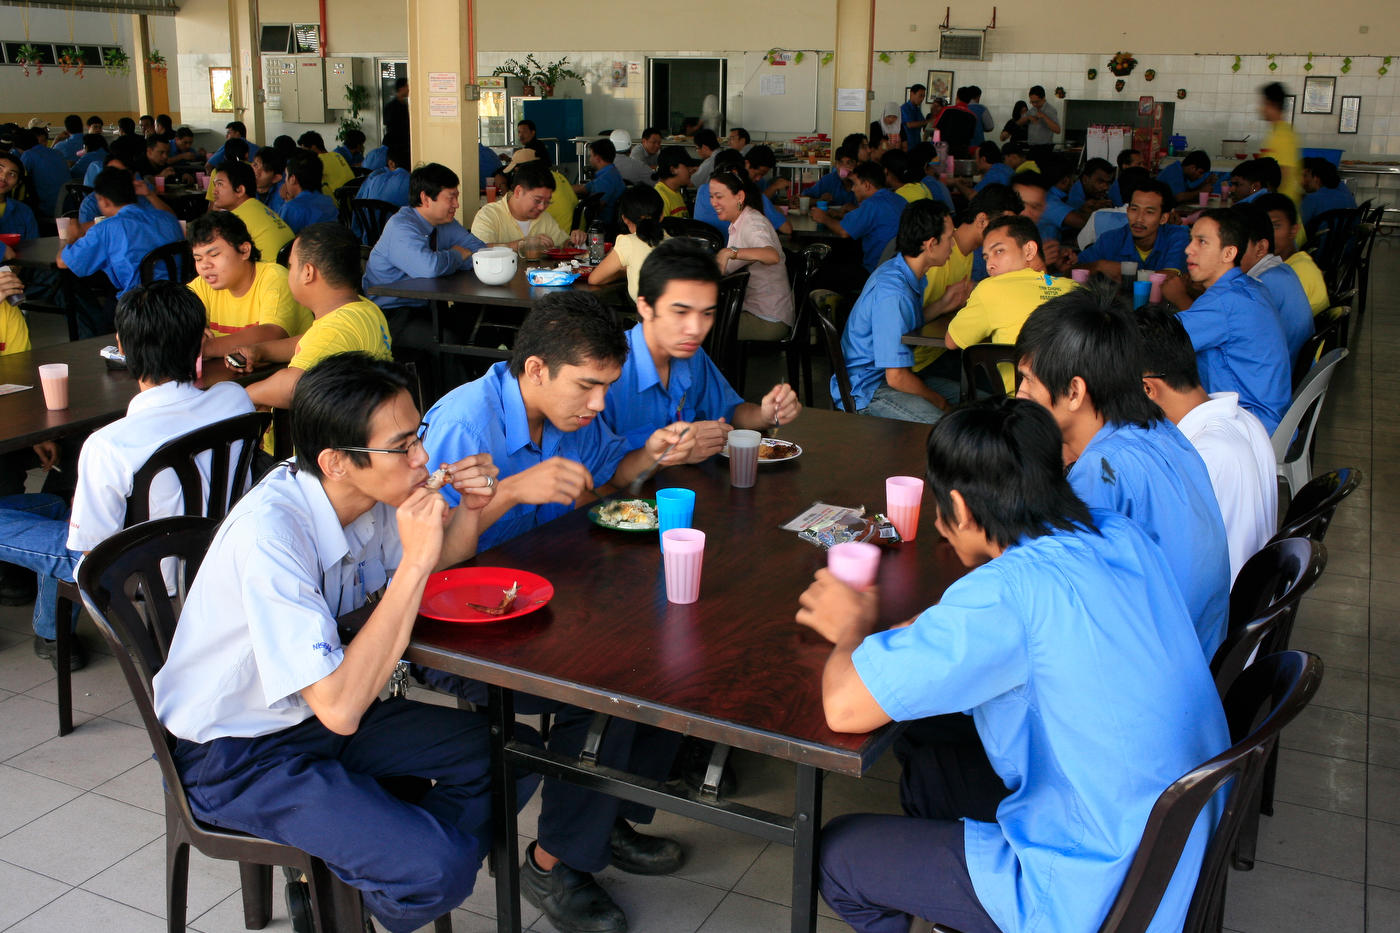 Nissan company lunch room, Malaysia : BUSINESS & INDUSTRY : Viviane Moos |  Documentary Photographer